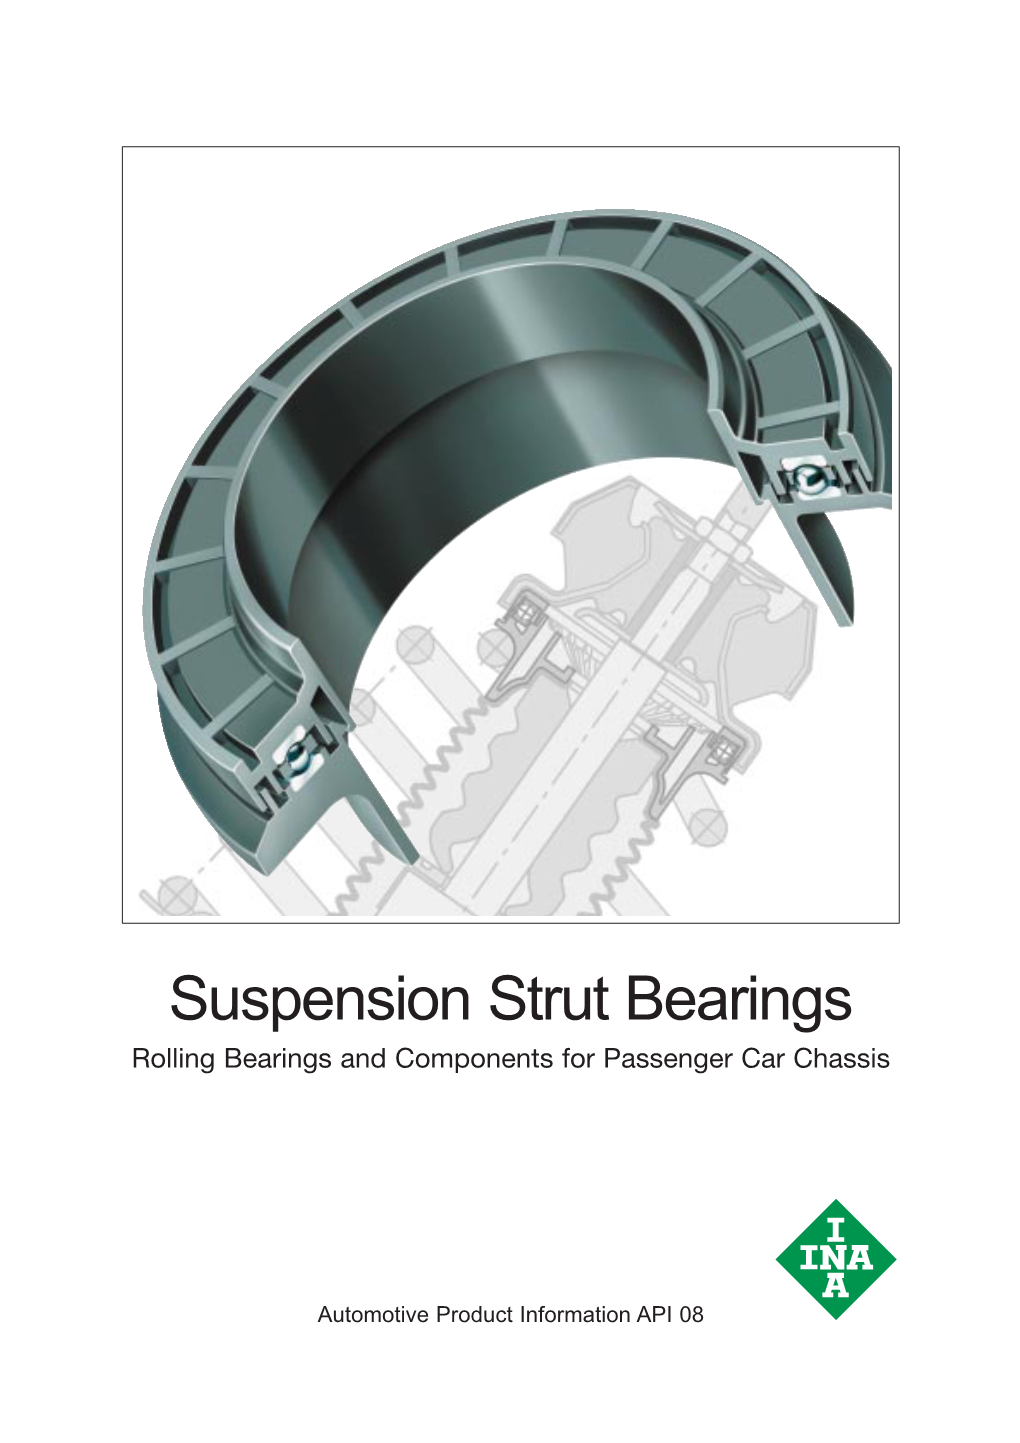 Suspension Strut Bearings: Rolling Bearings and Components For